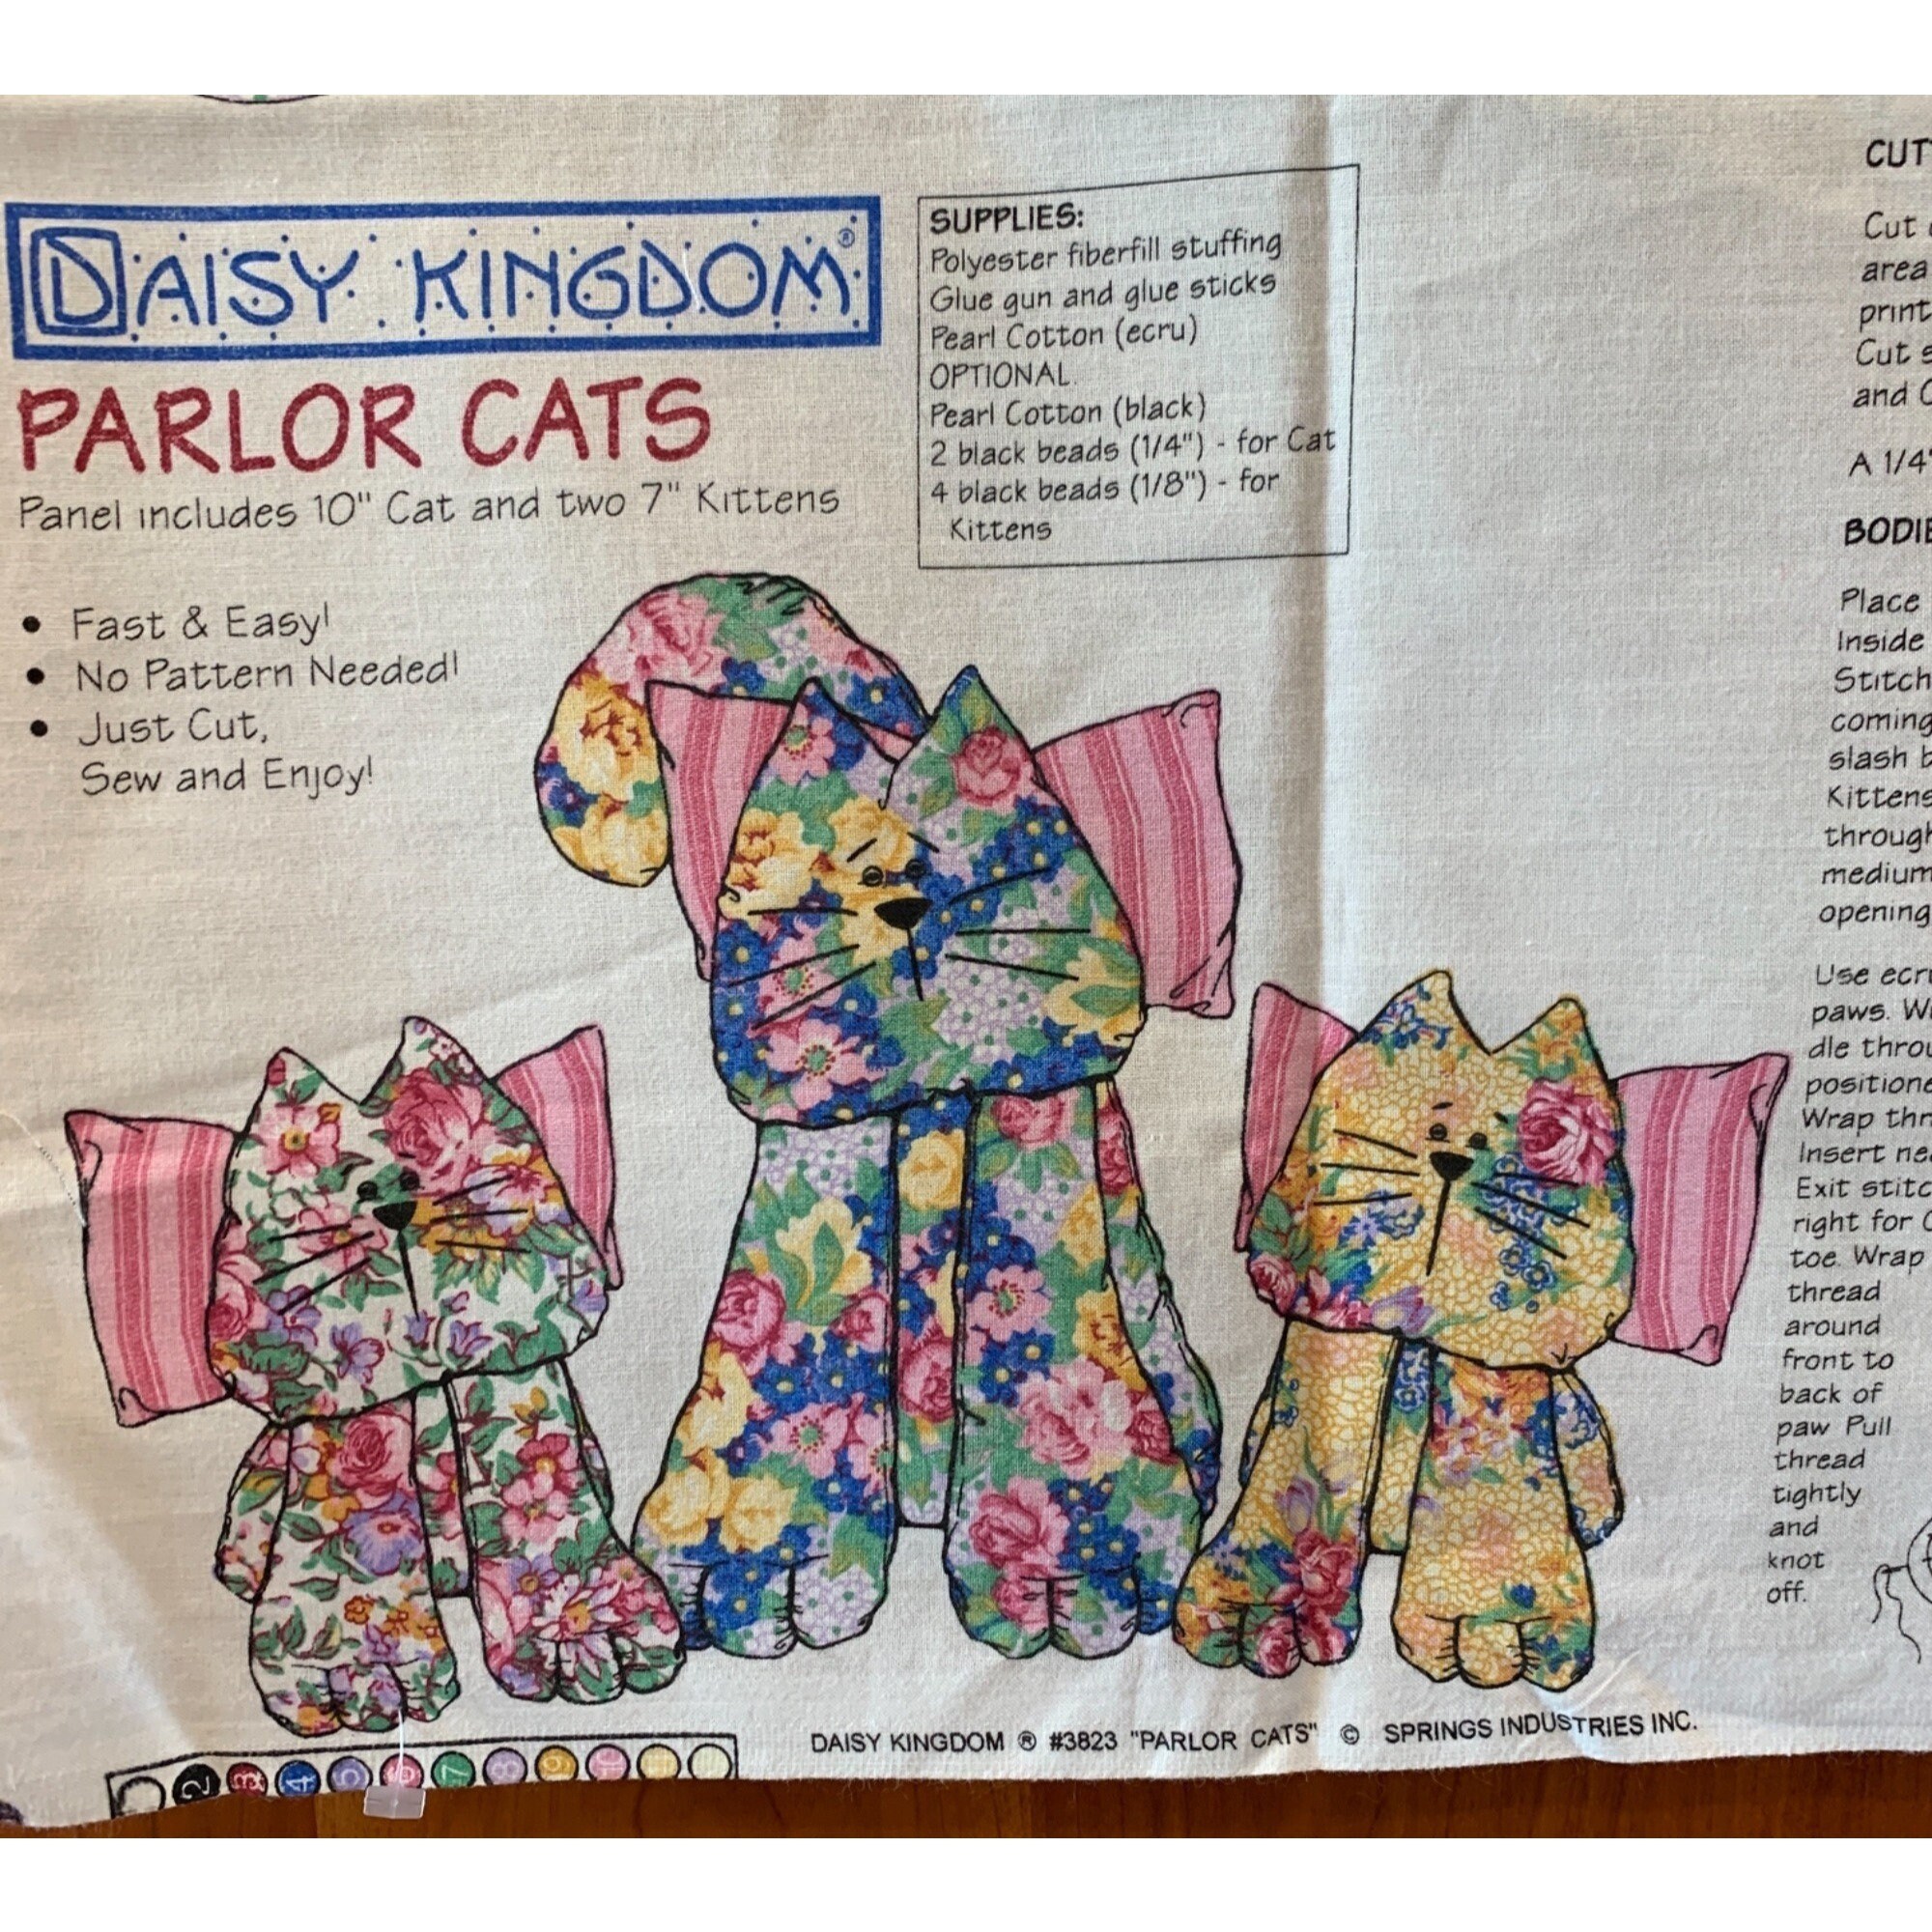 Cut and Sew Parlor Cats Fabric Panel with Pattern Daisy Kingdom Floral Kittens 